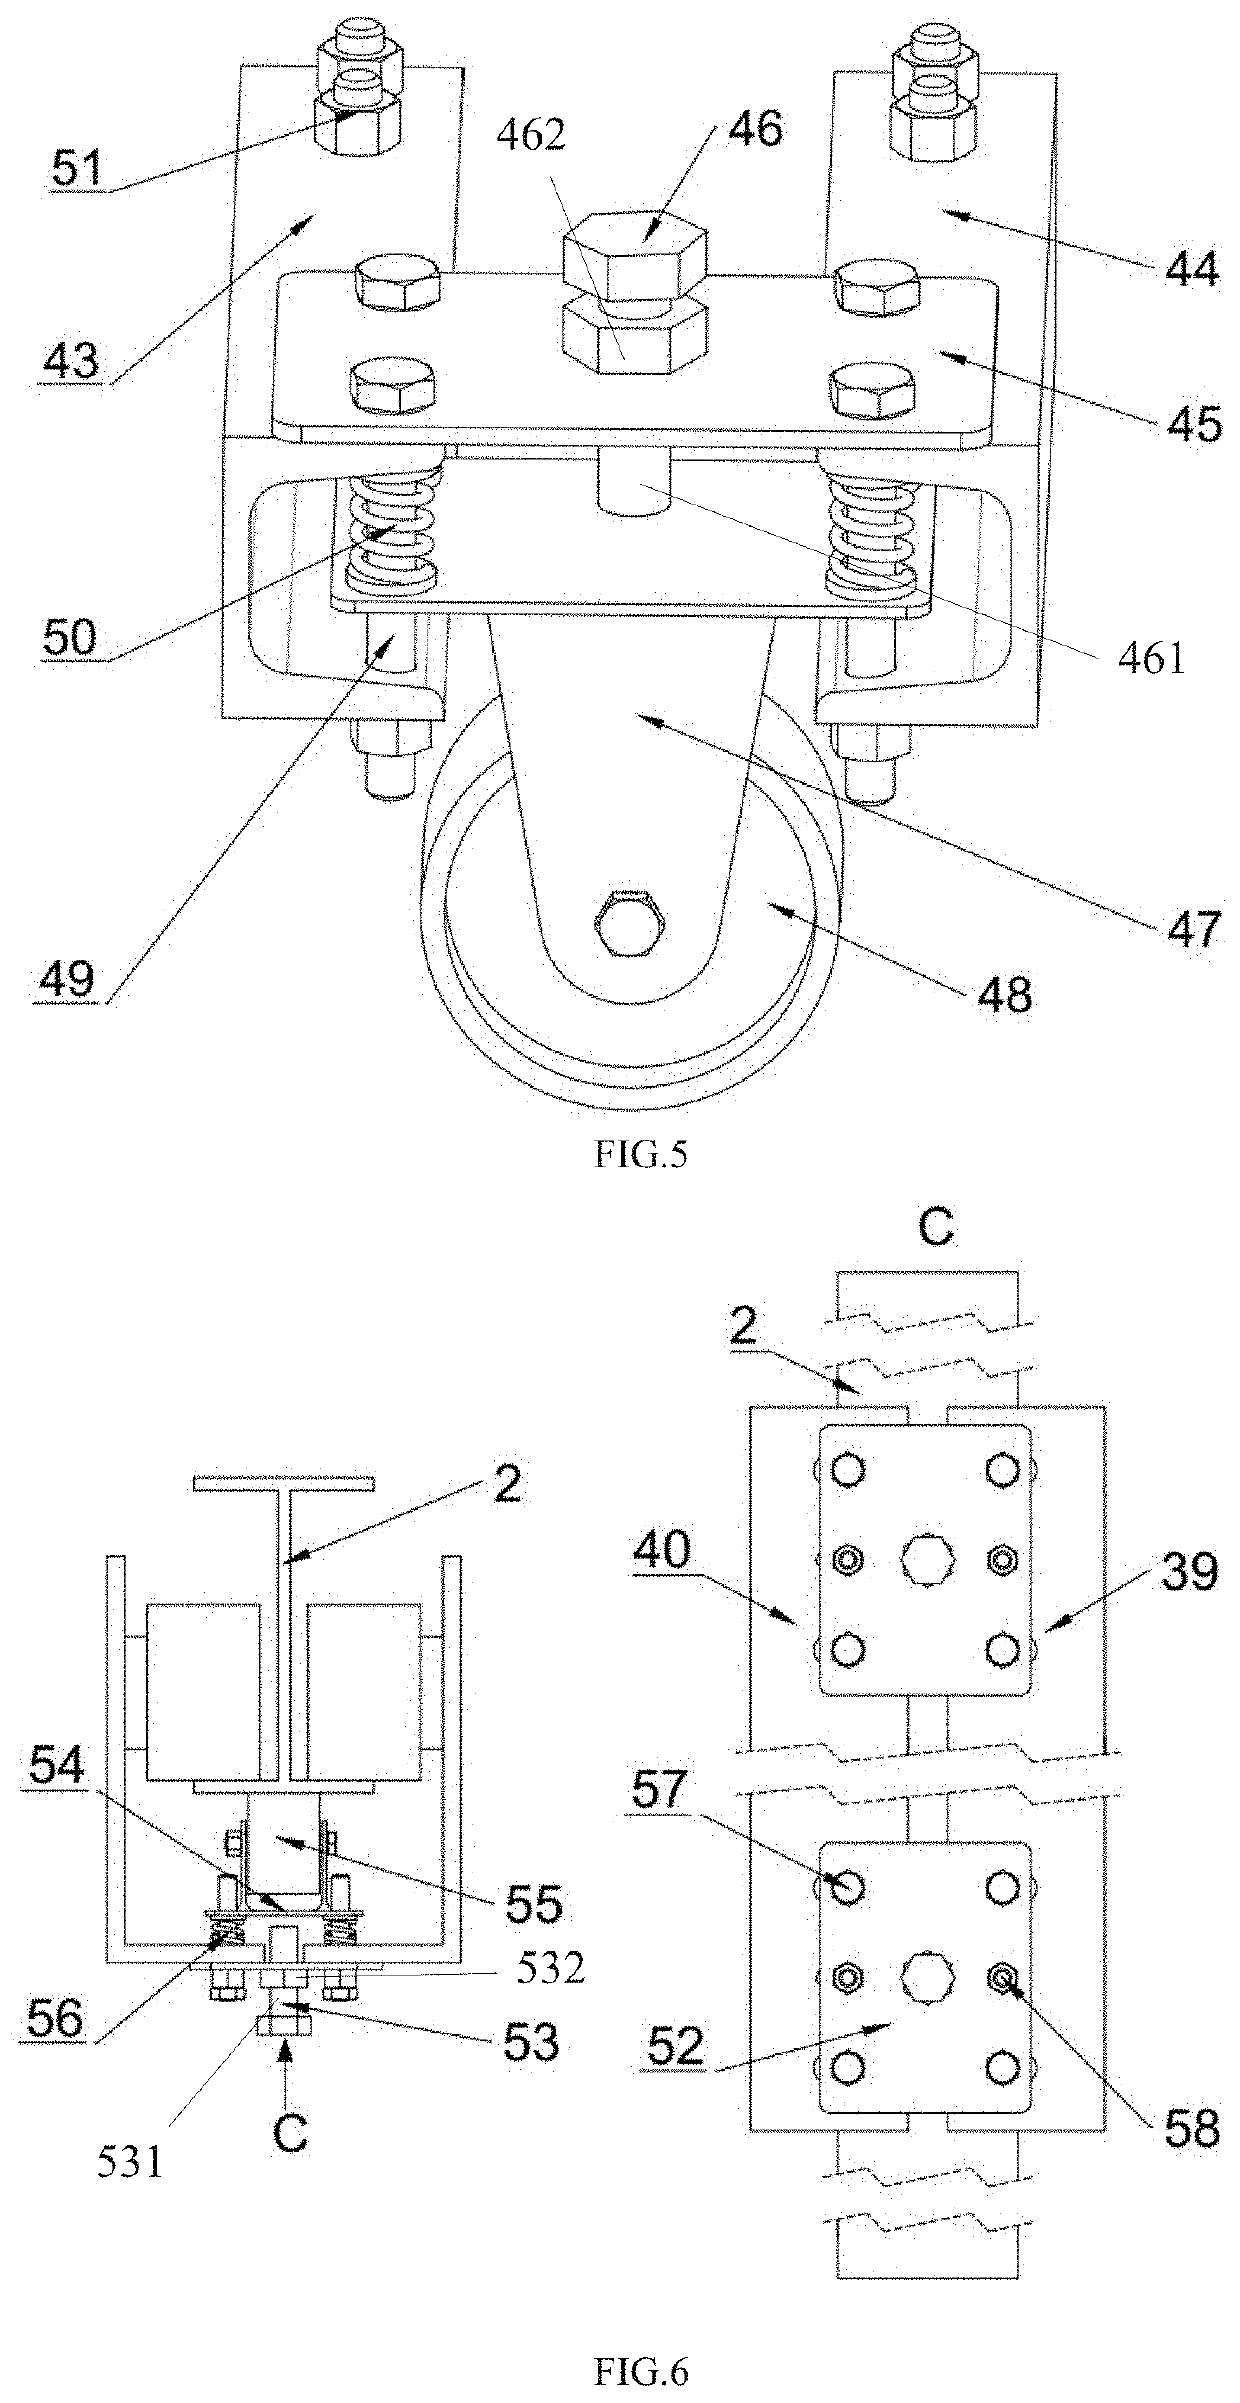 Walking device with self-adaptive track gauge and wheel pressure for preventing rail gnawing